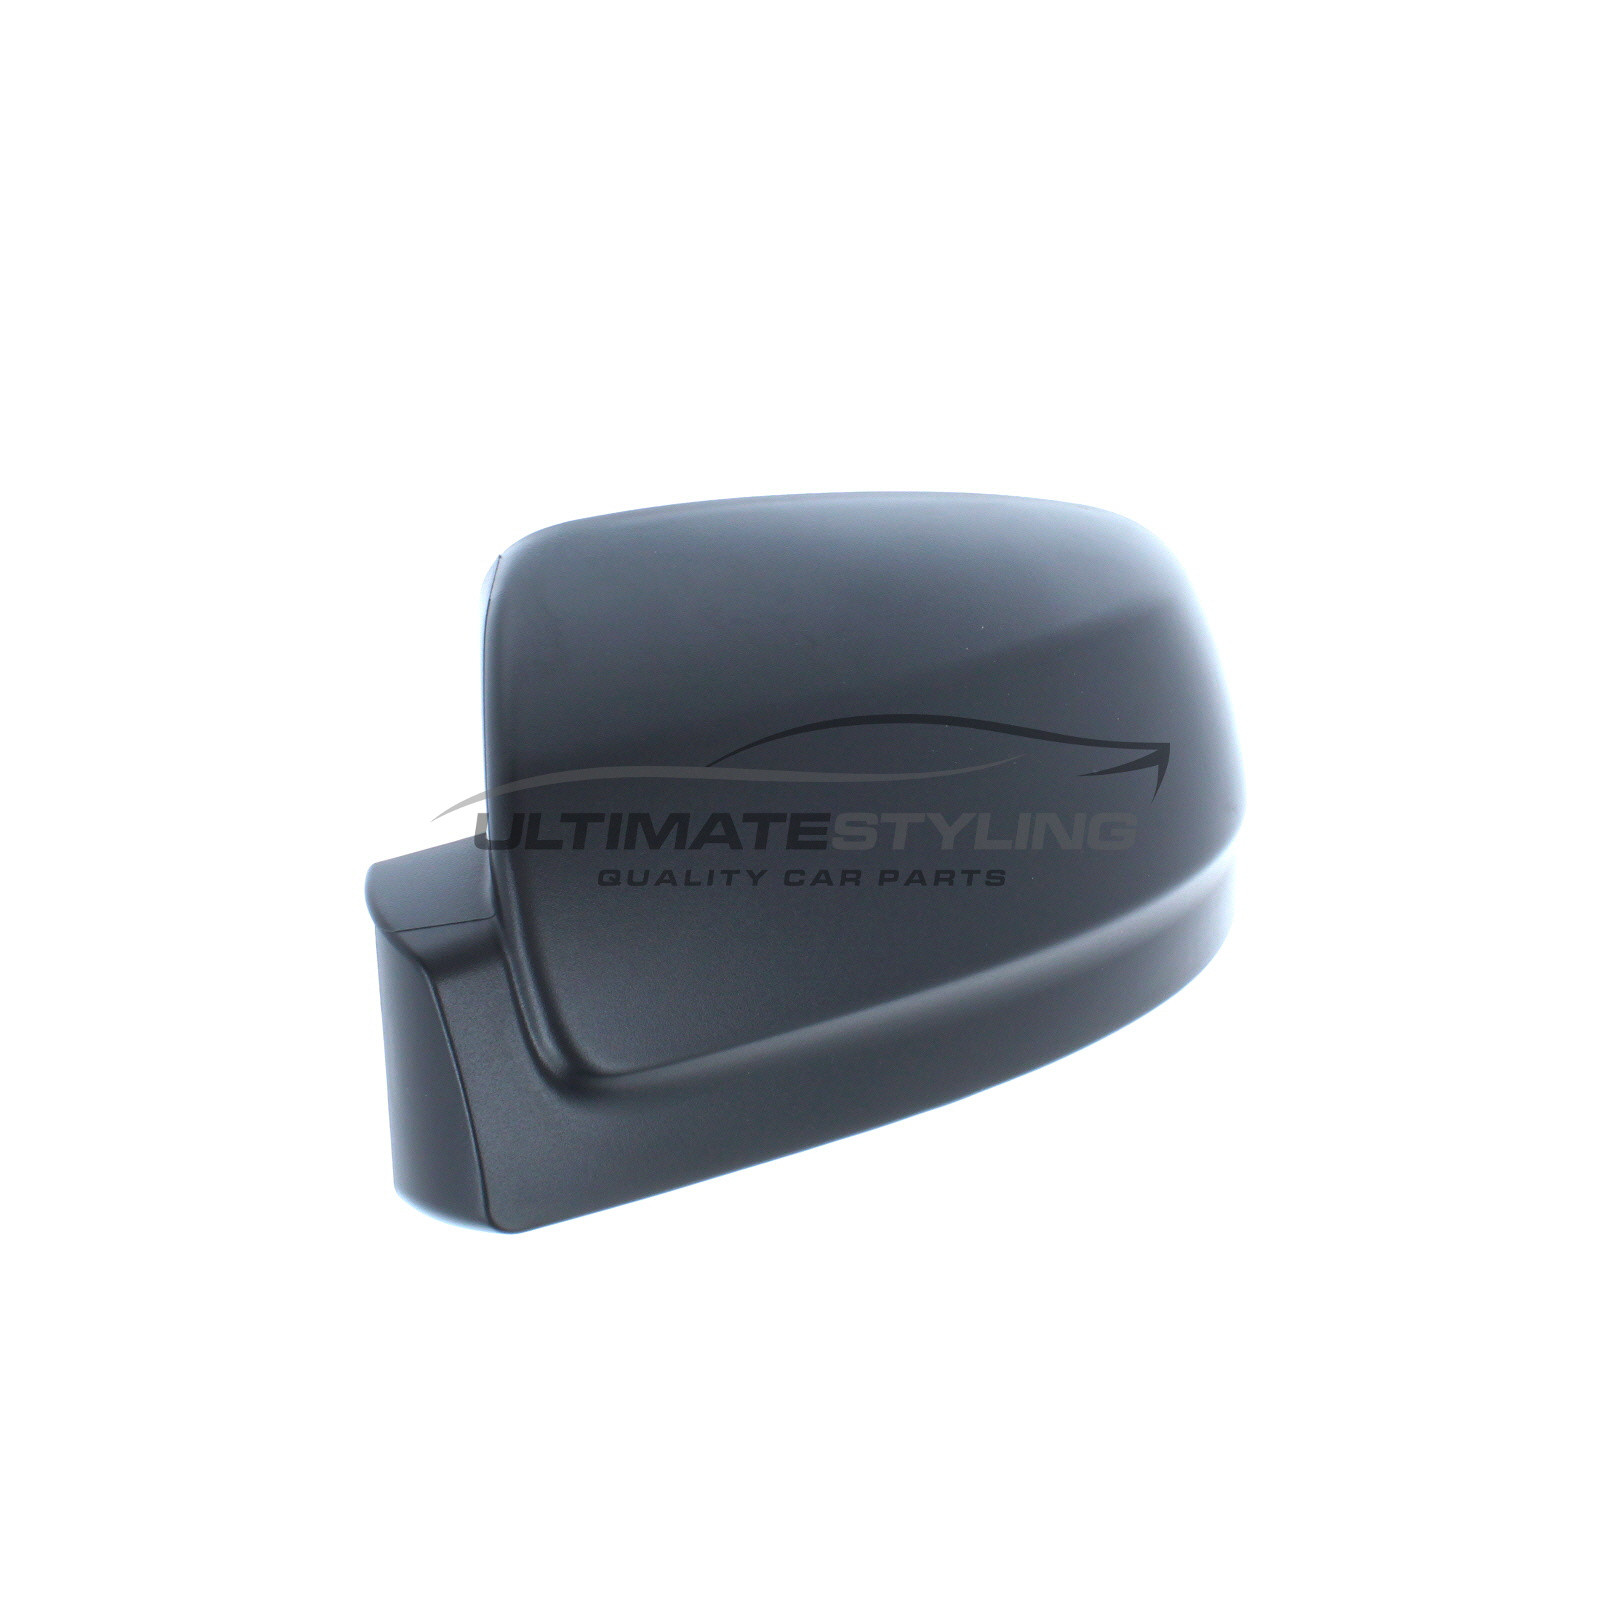 Mercedes Benz Vito Wing Mirror Cover - Passenger Side (LH) - Black